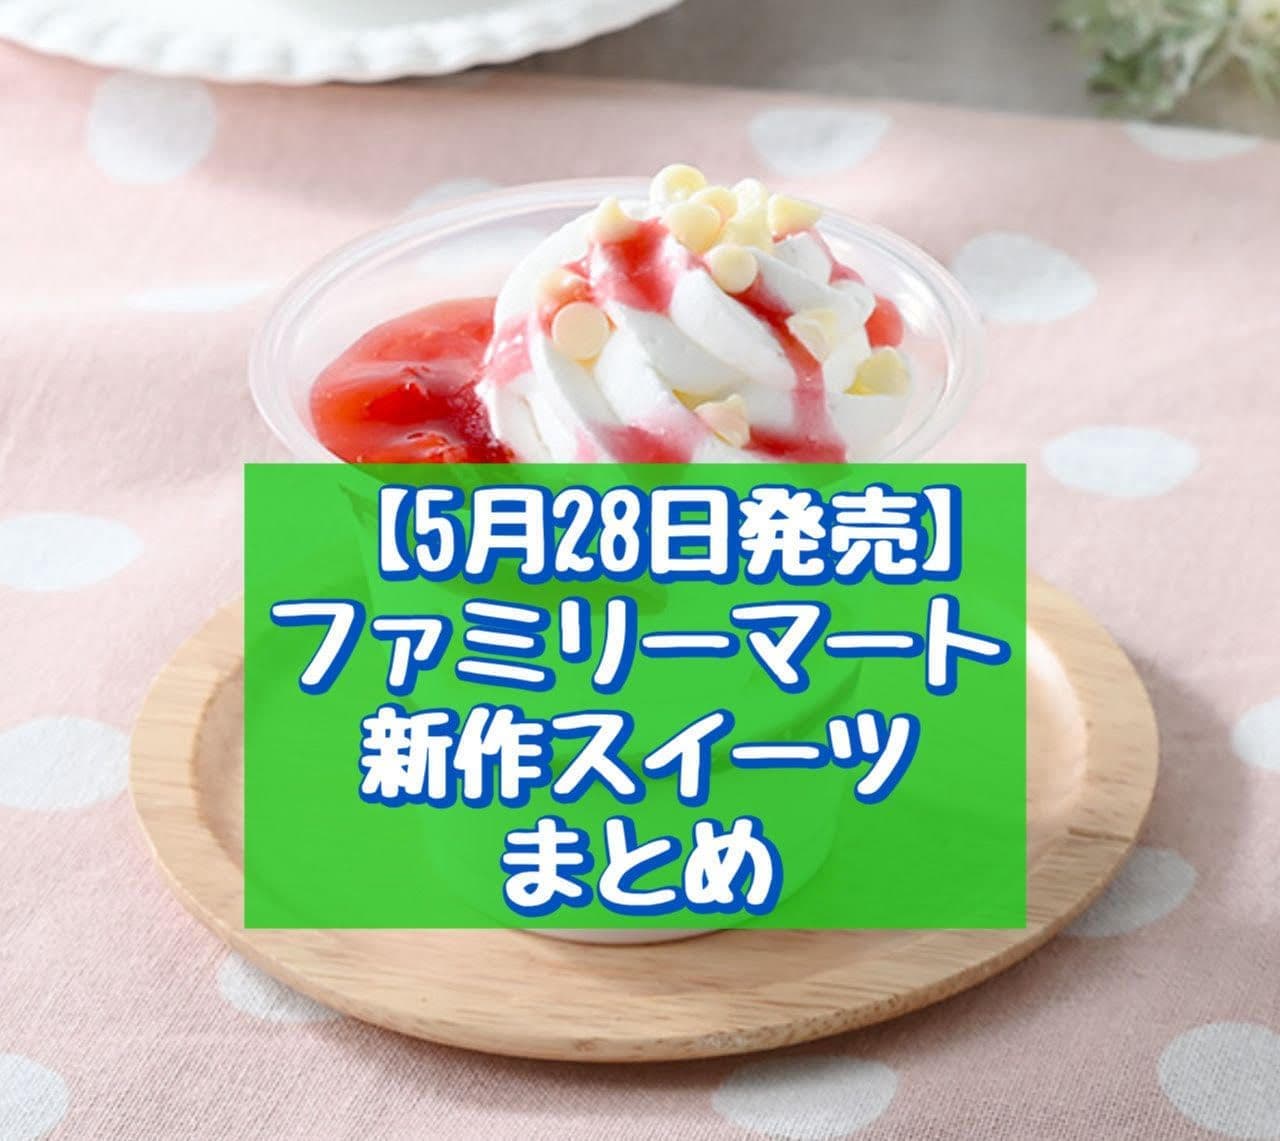 May 28th release】Summary of FamilyMart's new sweets